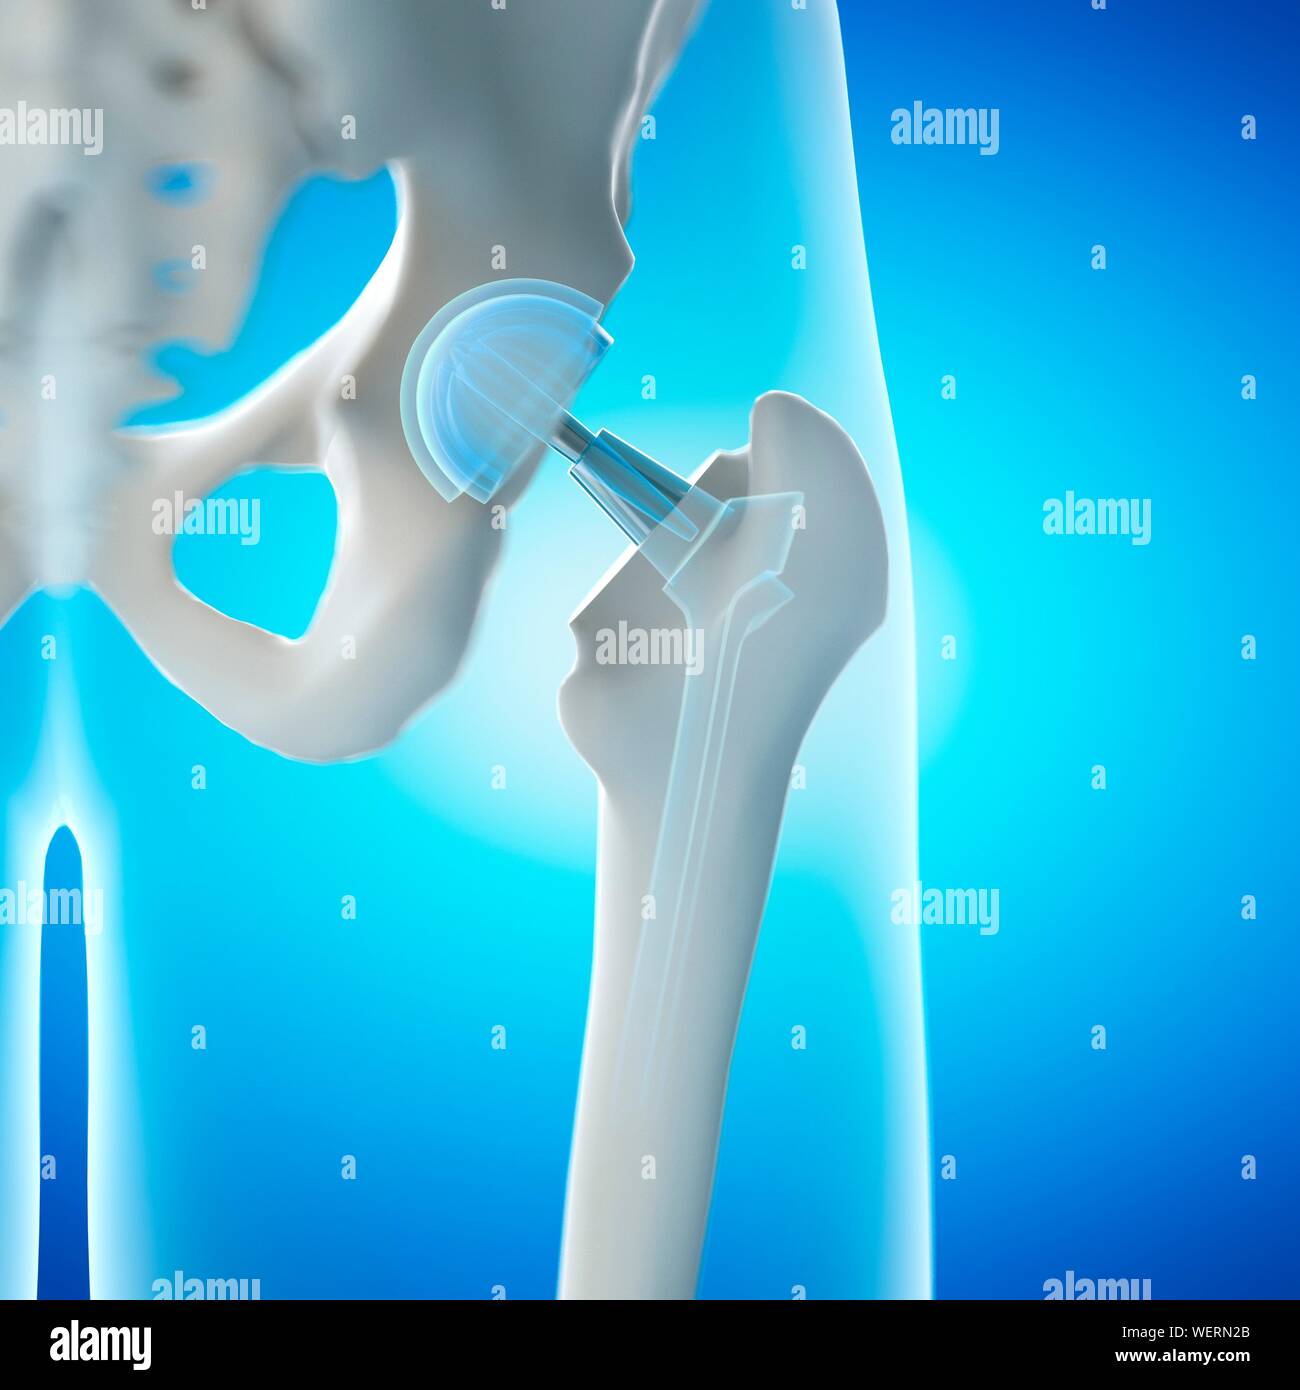 Hip replacement, illustration Stock Photo